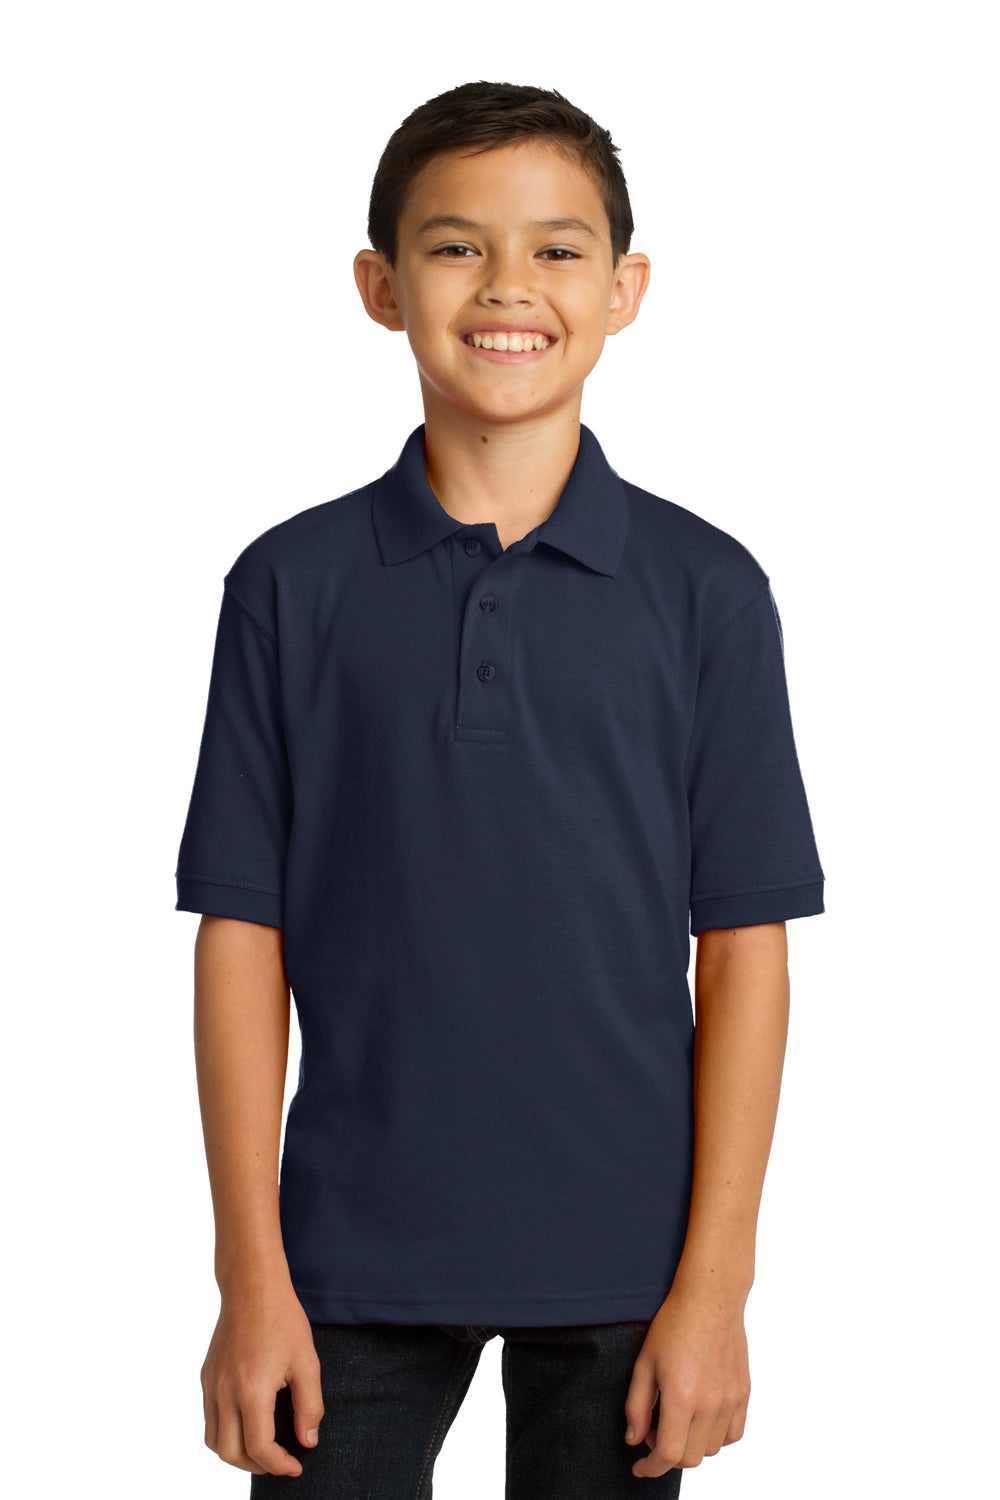 Port & Company KP55Y Youth Core Stain Resistant Short Sleeve Polo Shirt Navy Blue Front